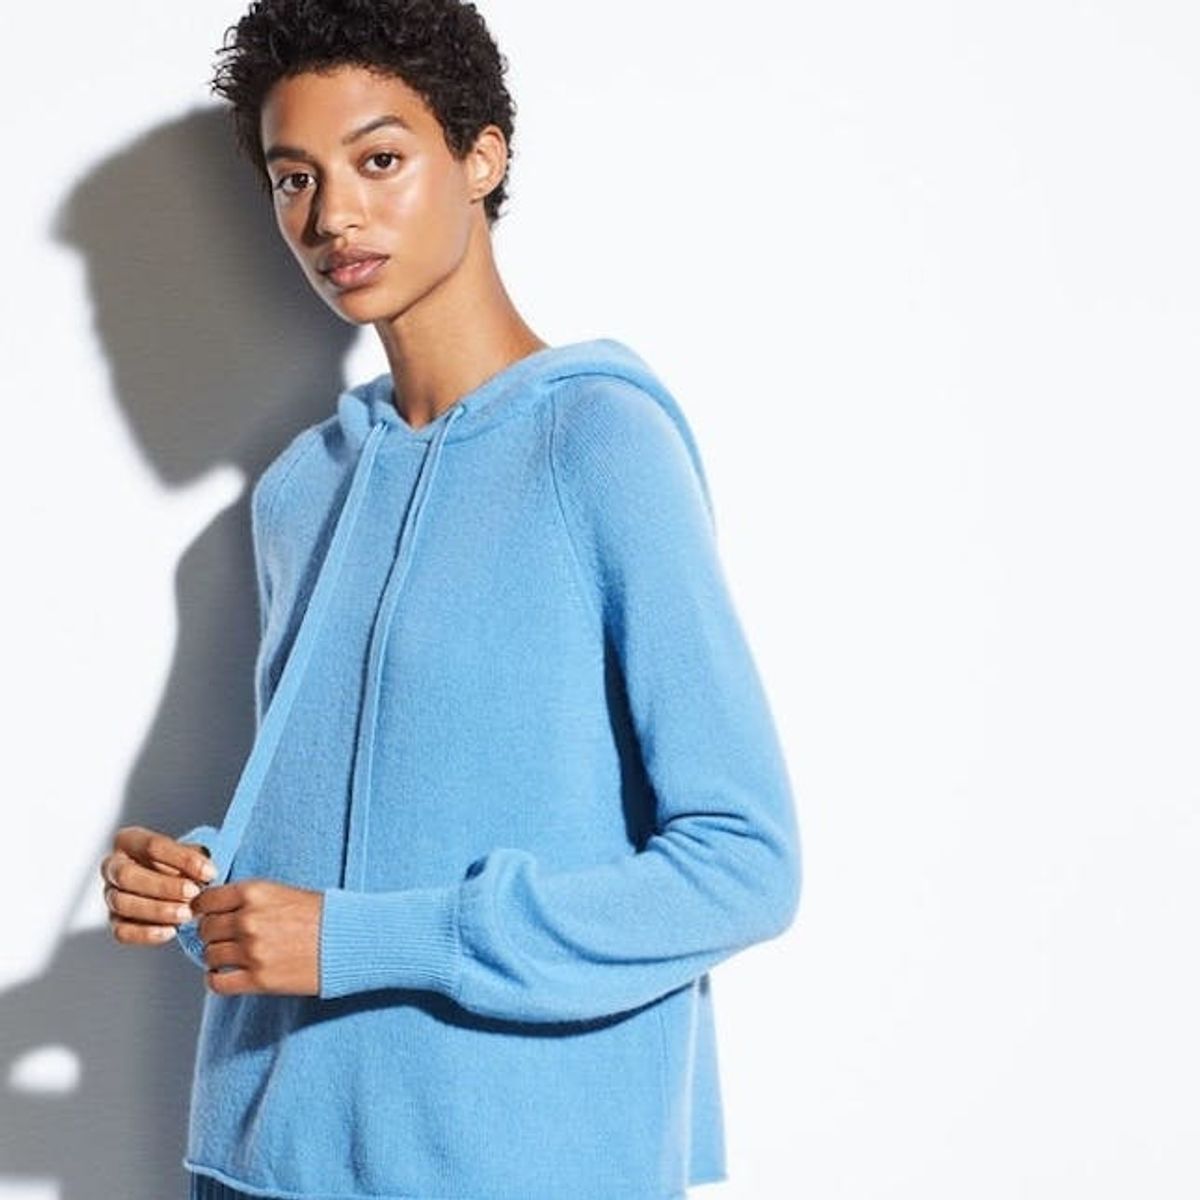 Warm-Weather Knitwear That Proves Summer Cashmere Is a Thing - Brit + Co